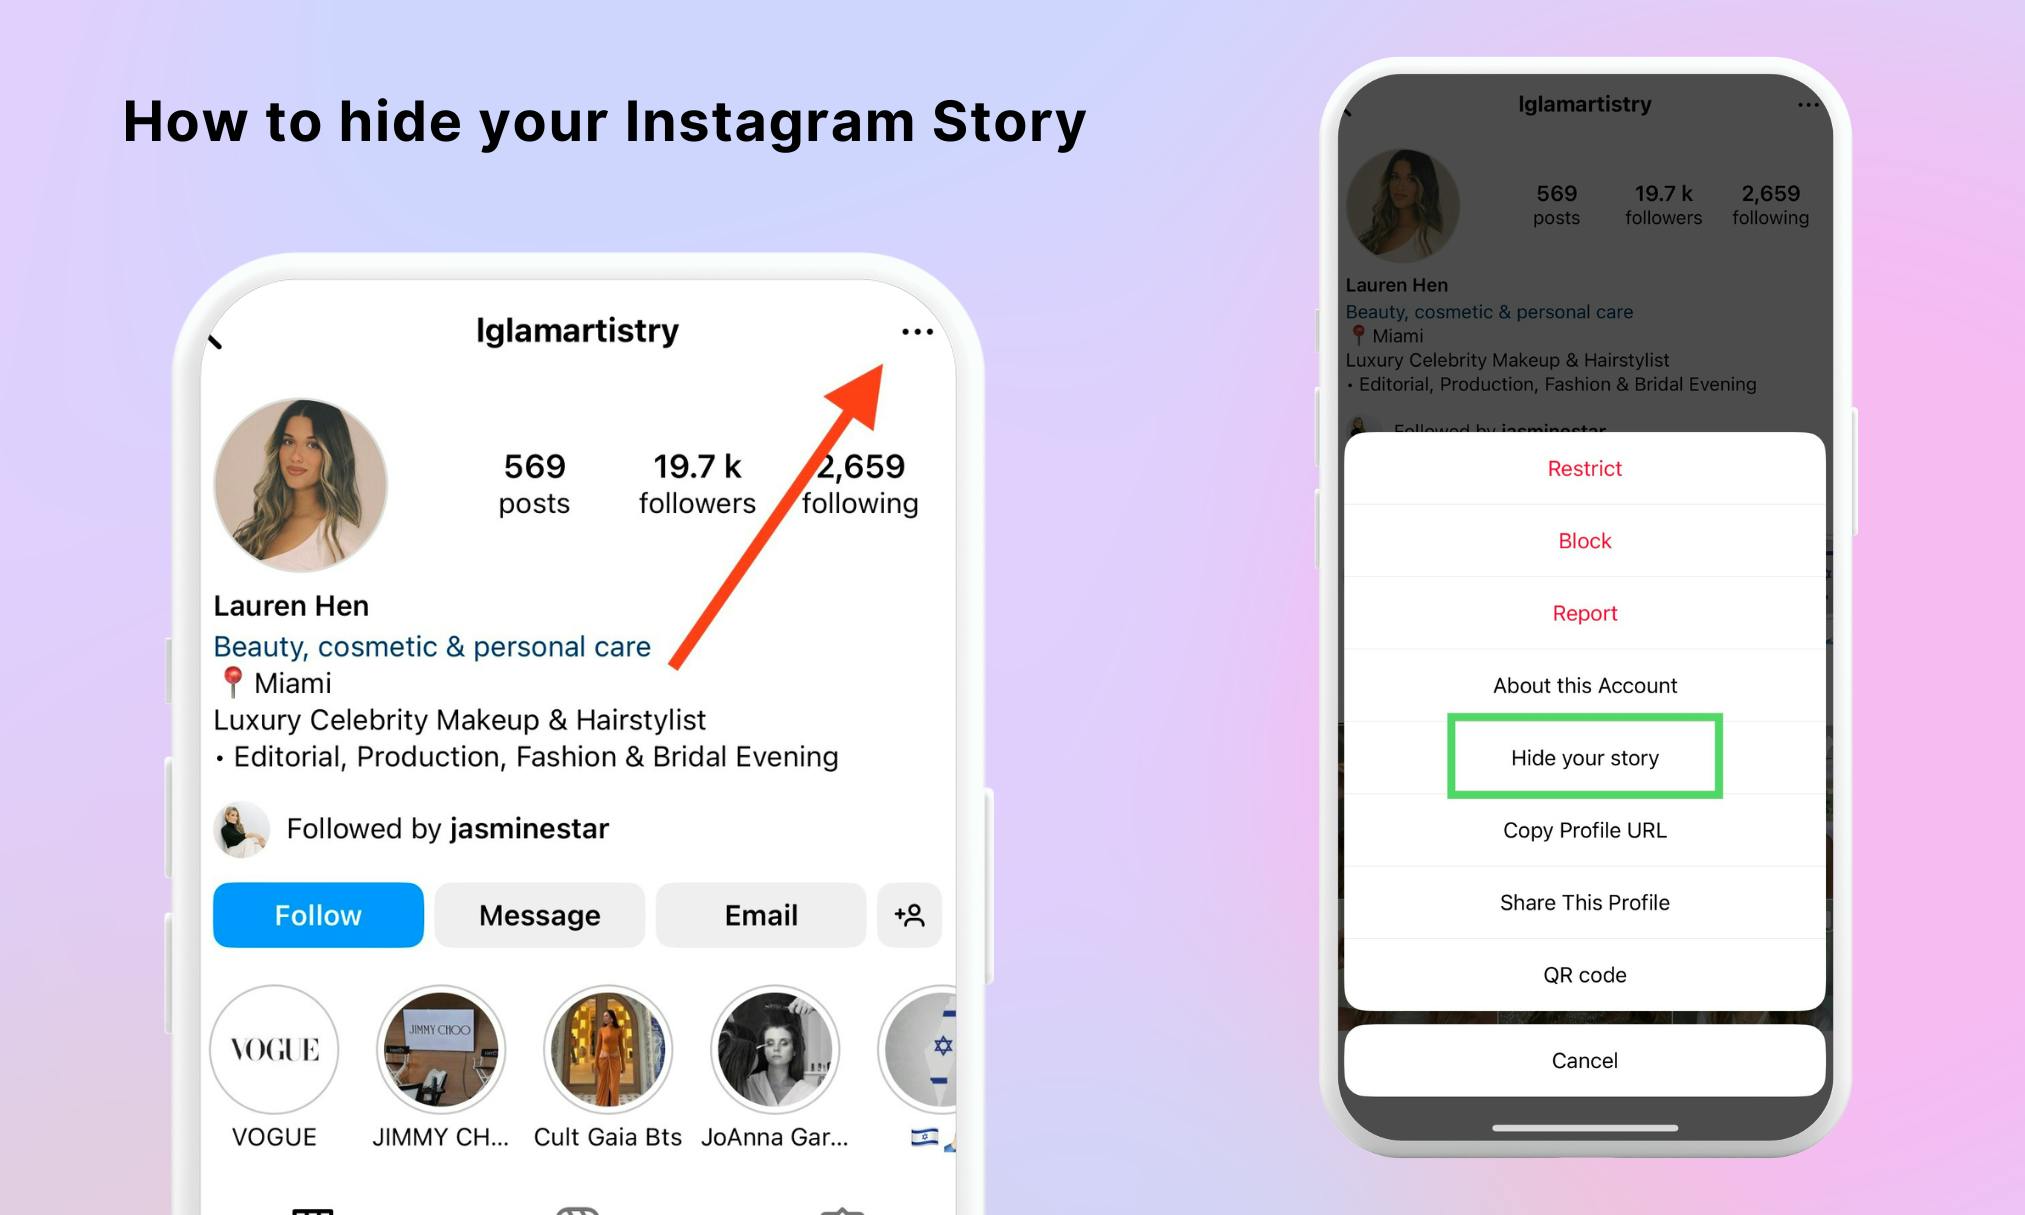 How to hide your Instagram Story from your followers